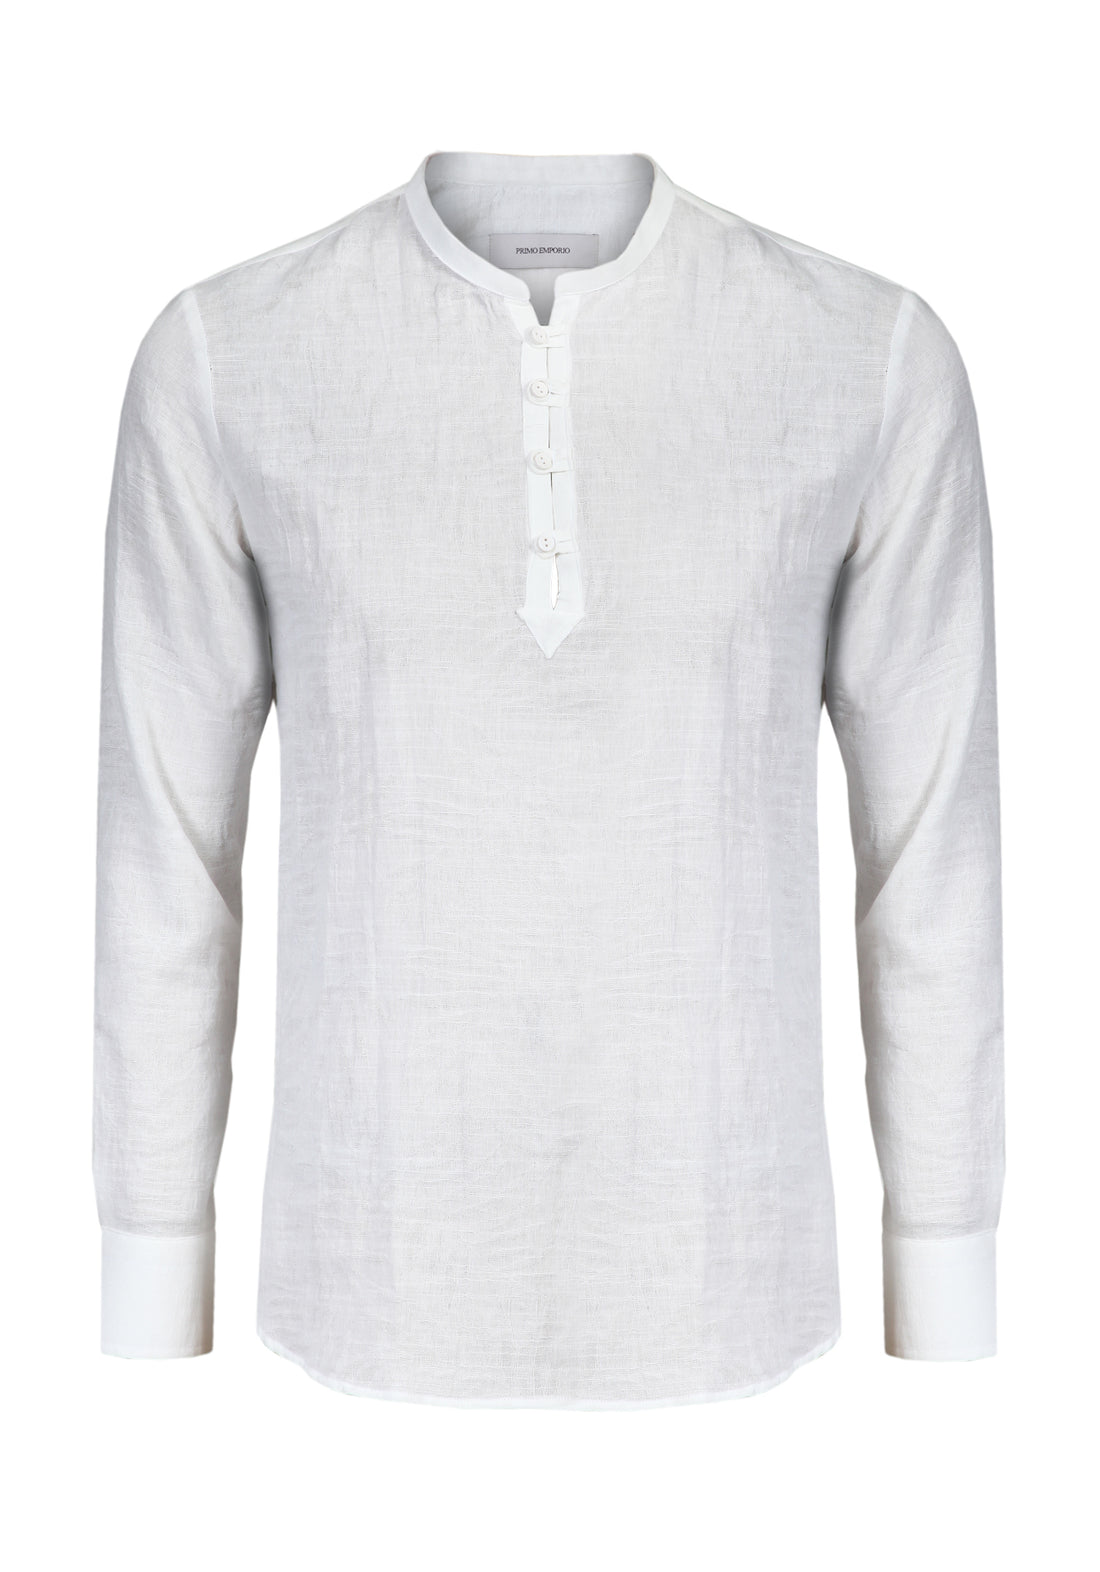 Tunic Shirt with Long Sleeve Buttons - White